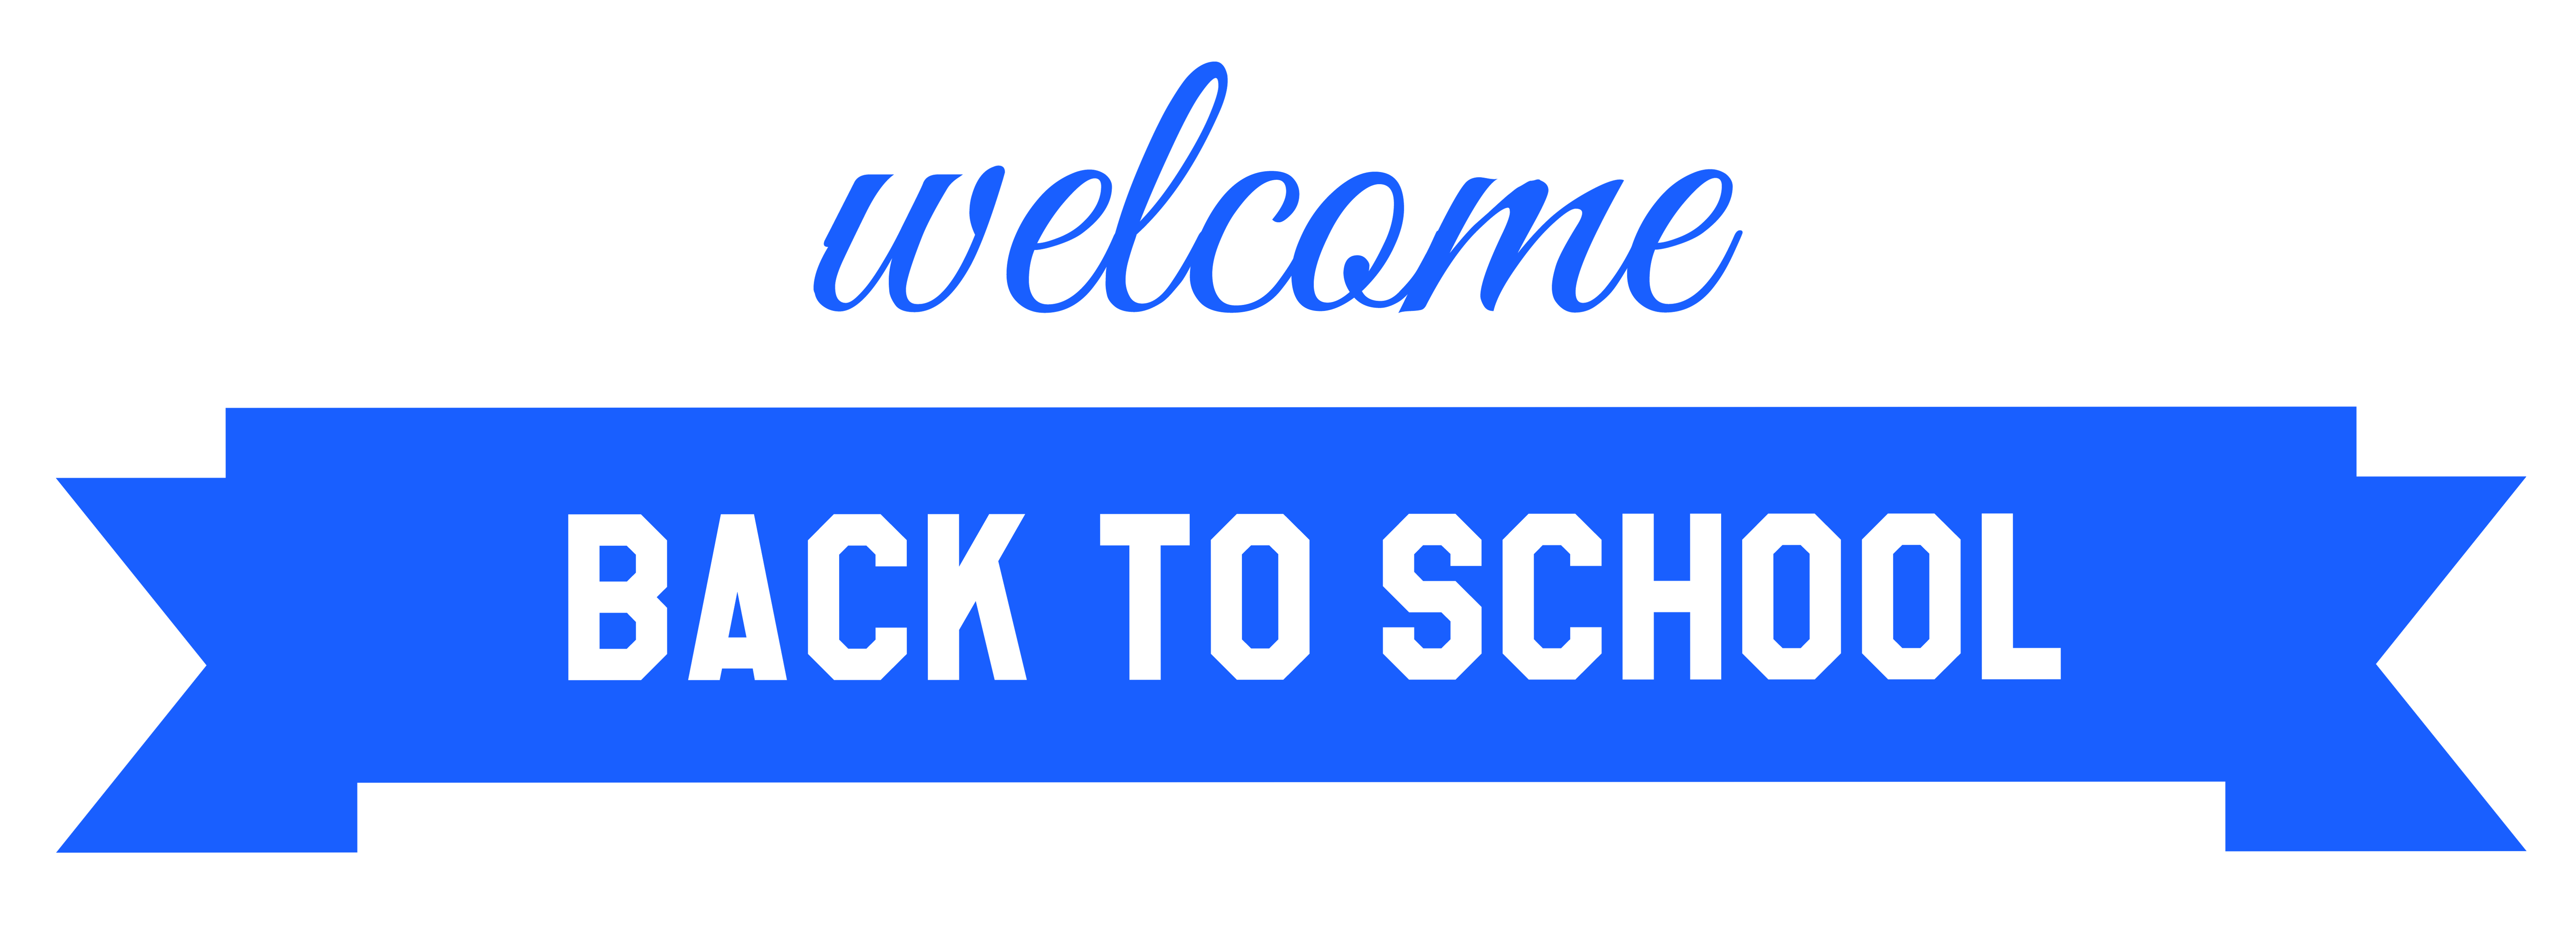 0 Result Images of Welcome Back Clipart Png - PNG Image Collection